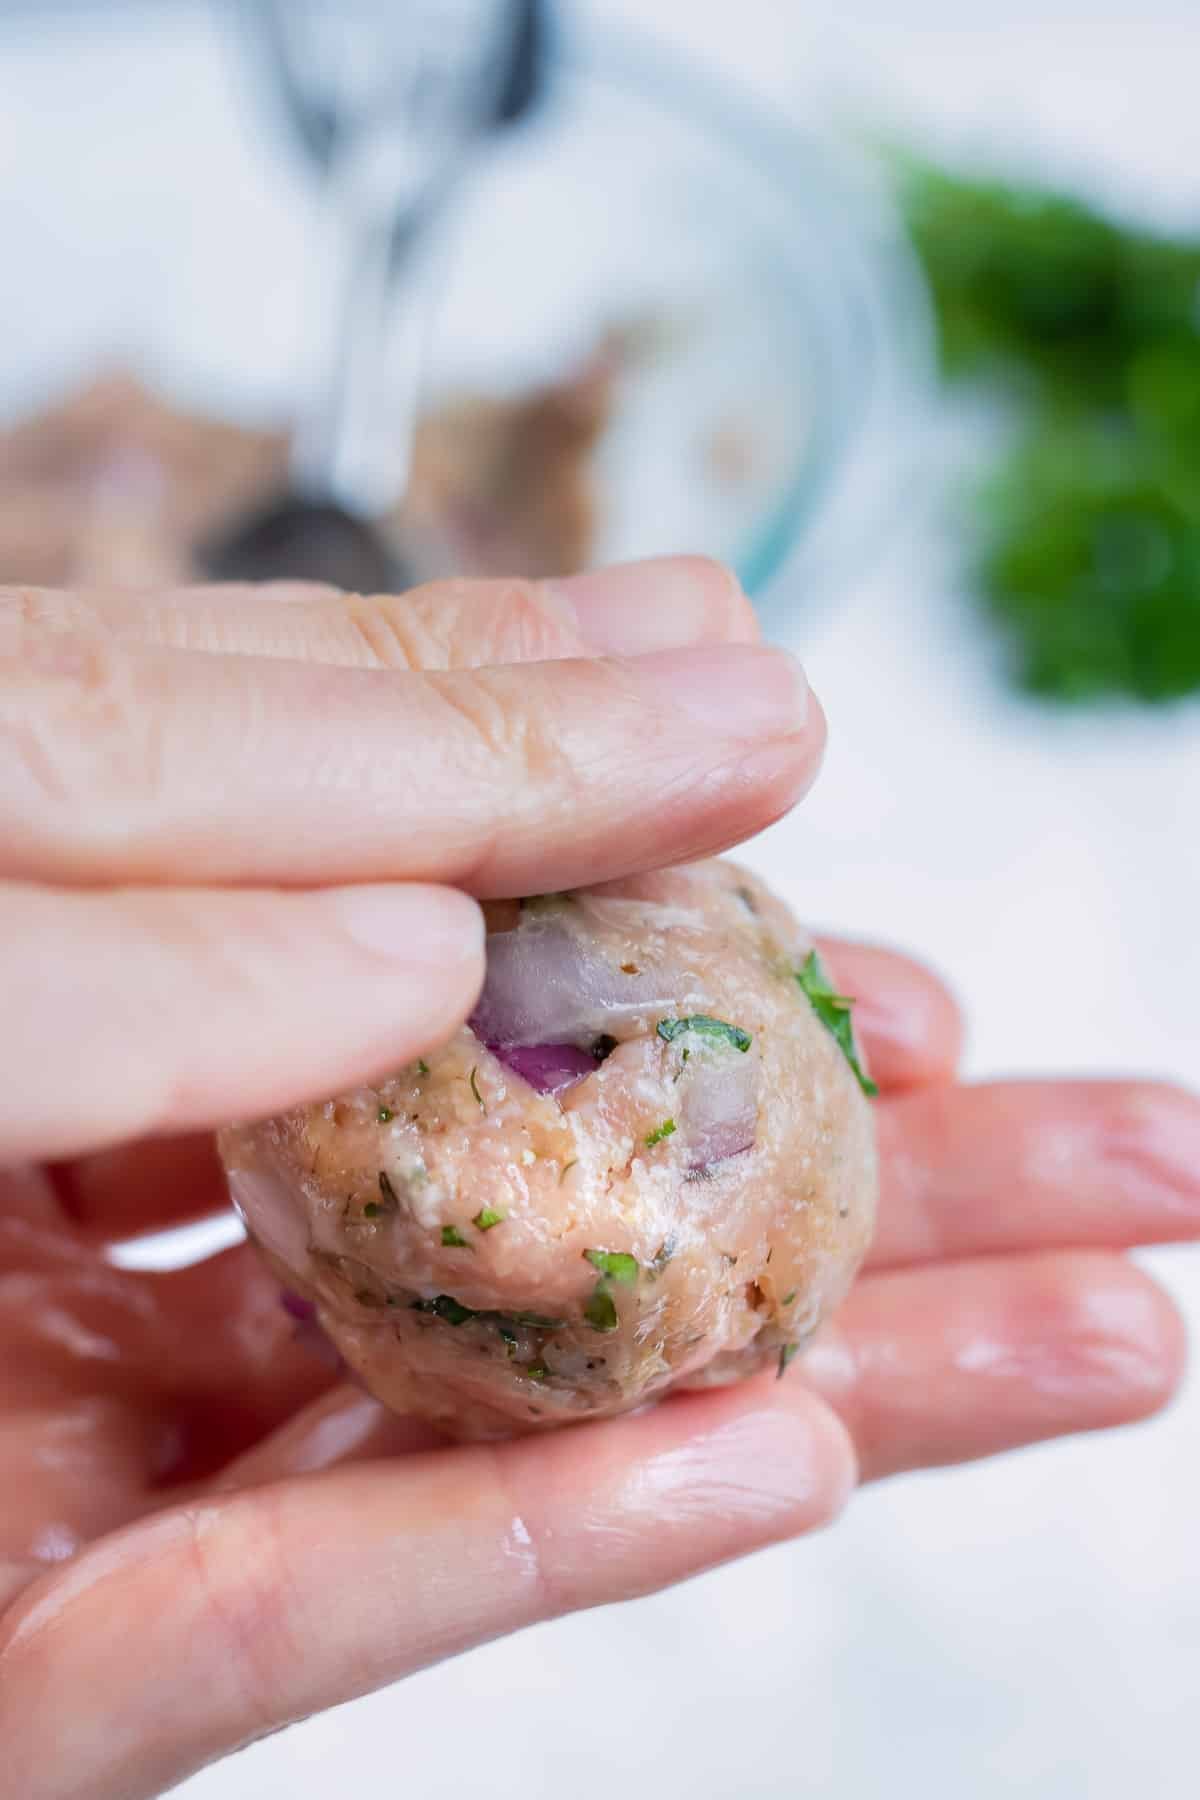 Greek turkey meatballs are rolled into balls before being cooked.